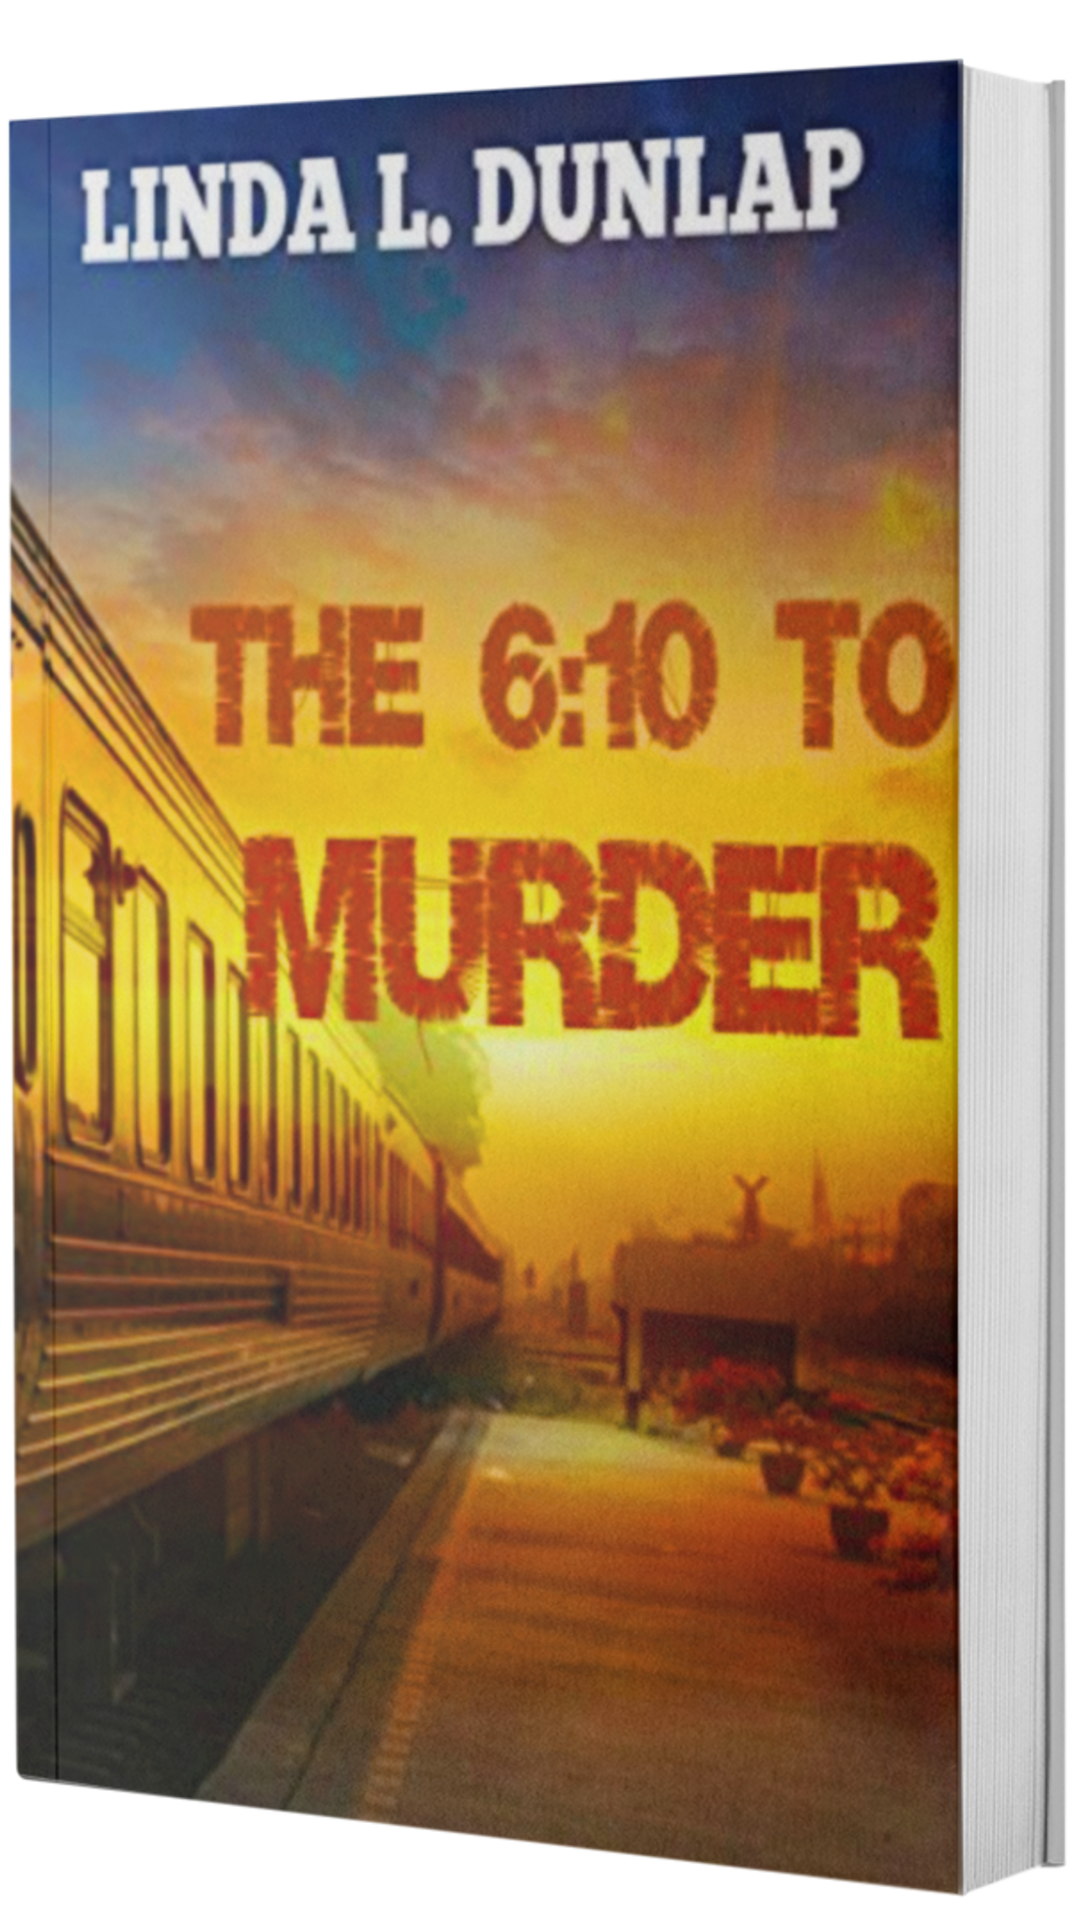 Link to purchase The 6:10 to Murder on Amazon